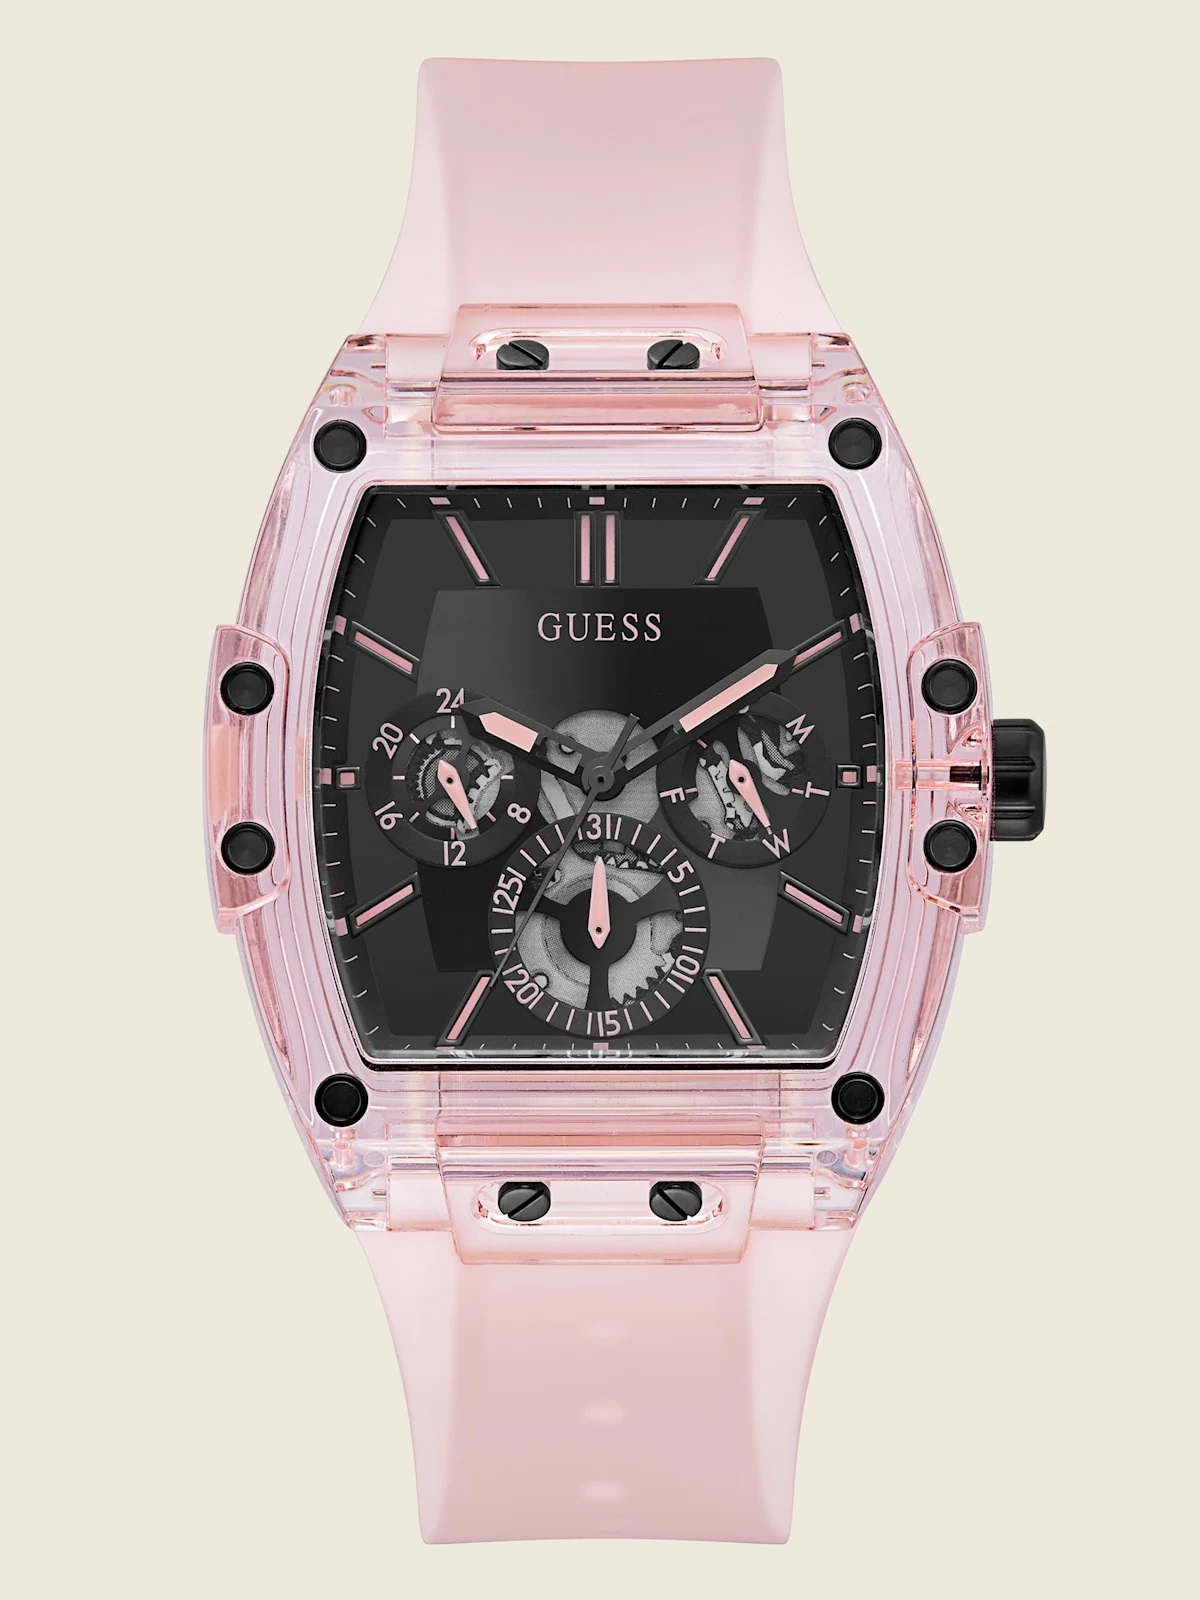 ĐỒNG HỒ GUESS PINK MULTIFUNCTION WATCH 4